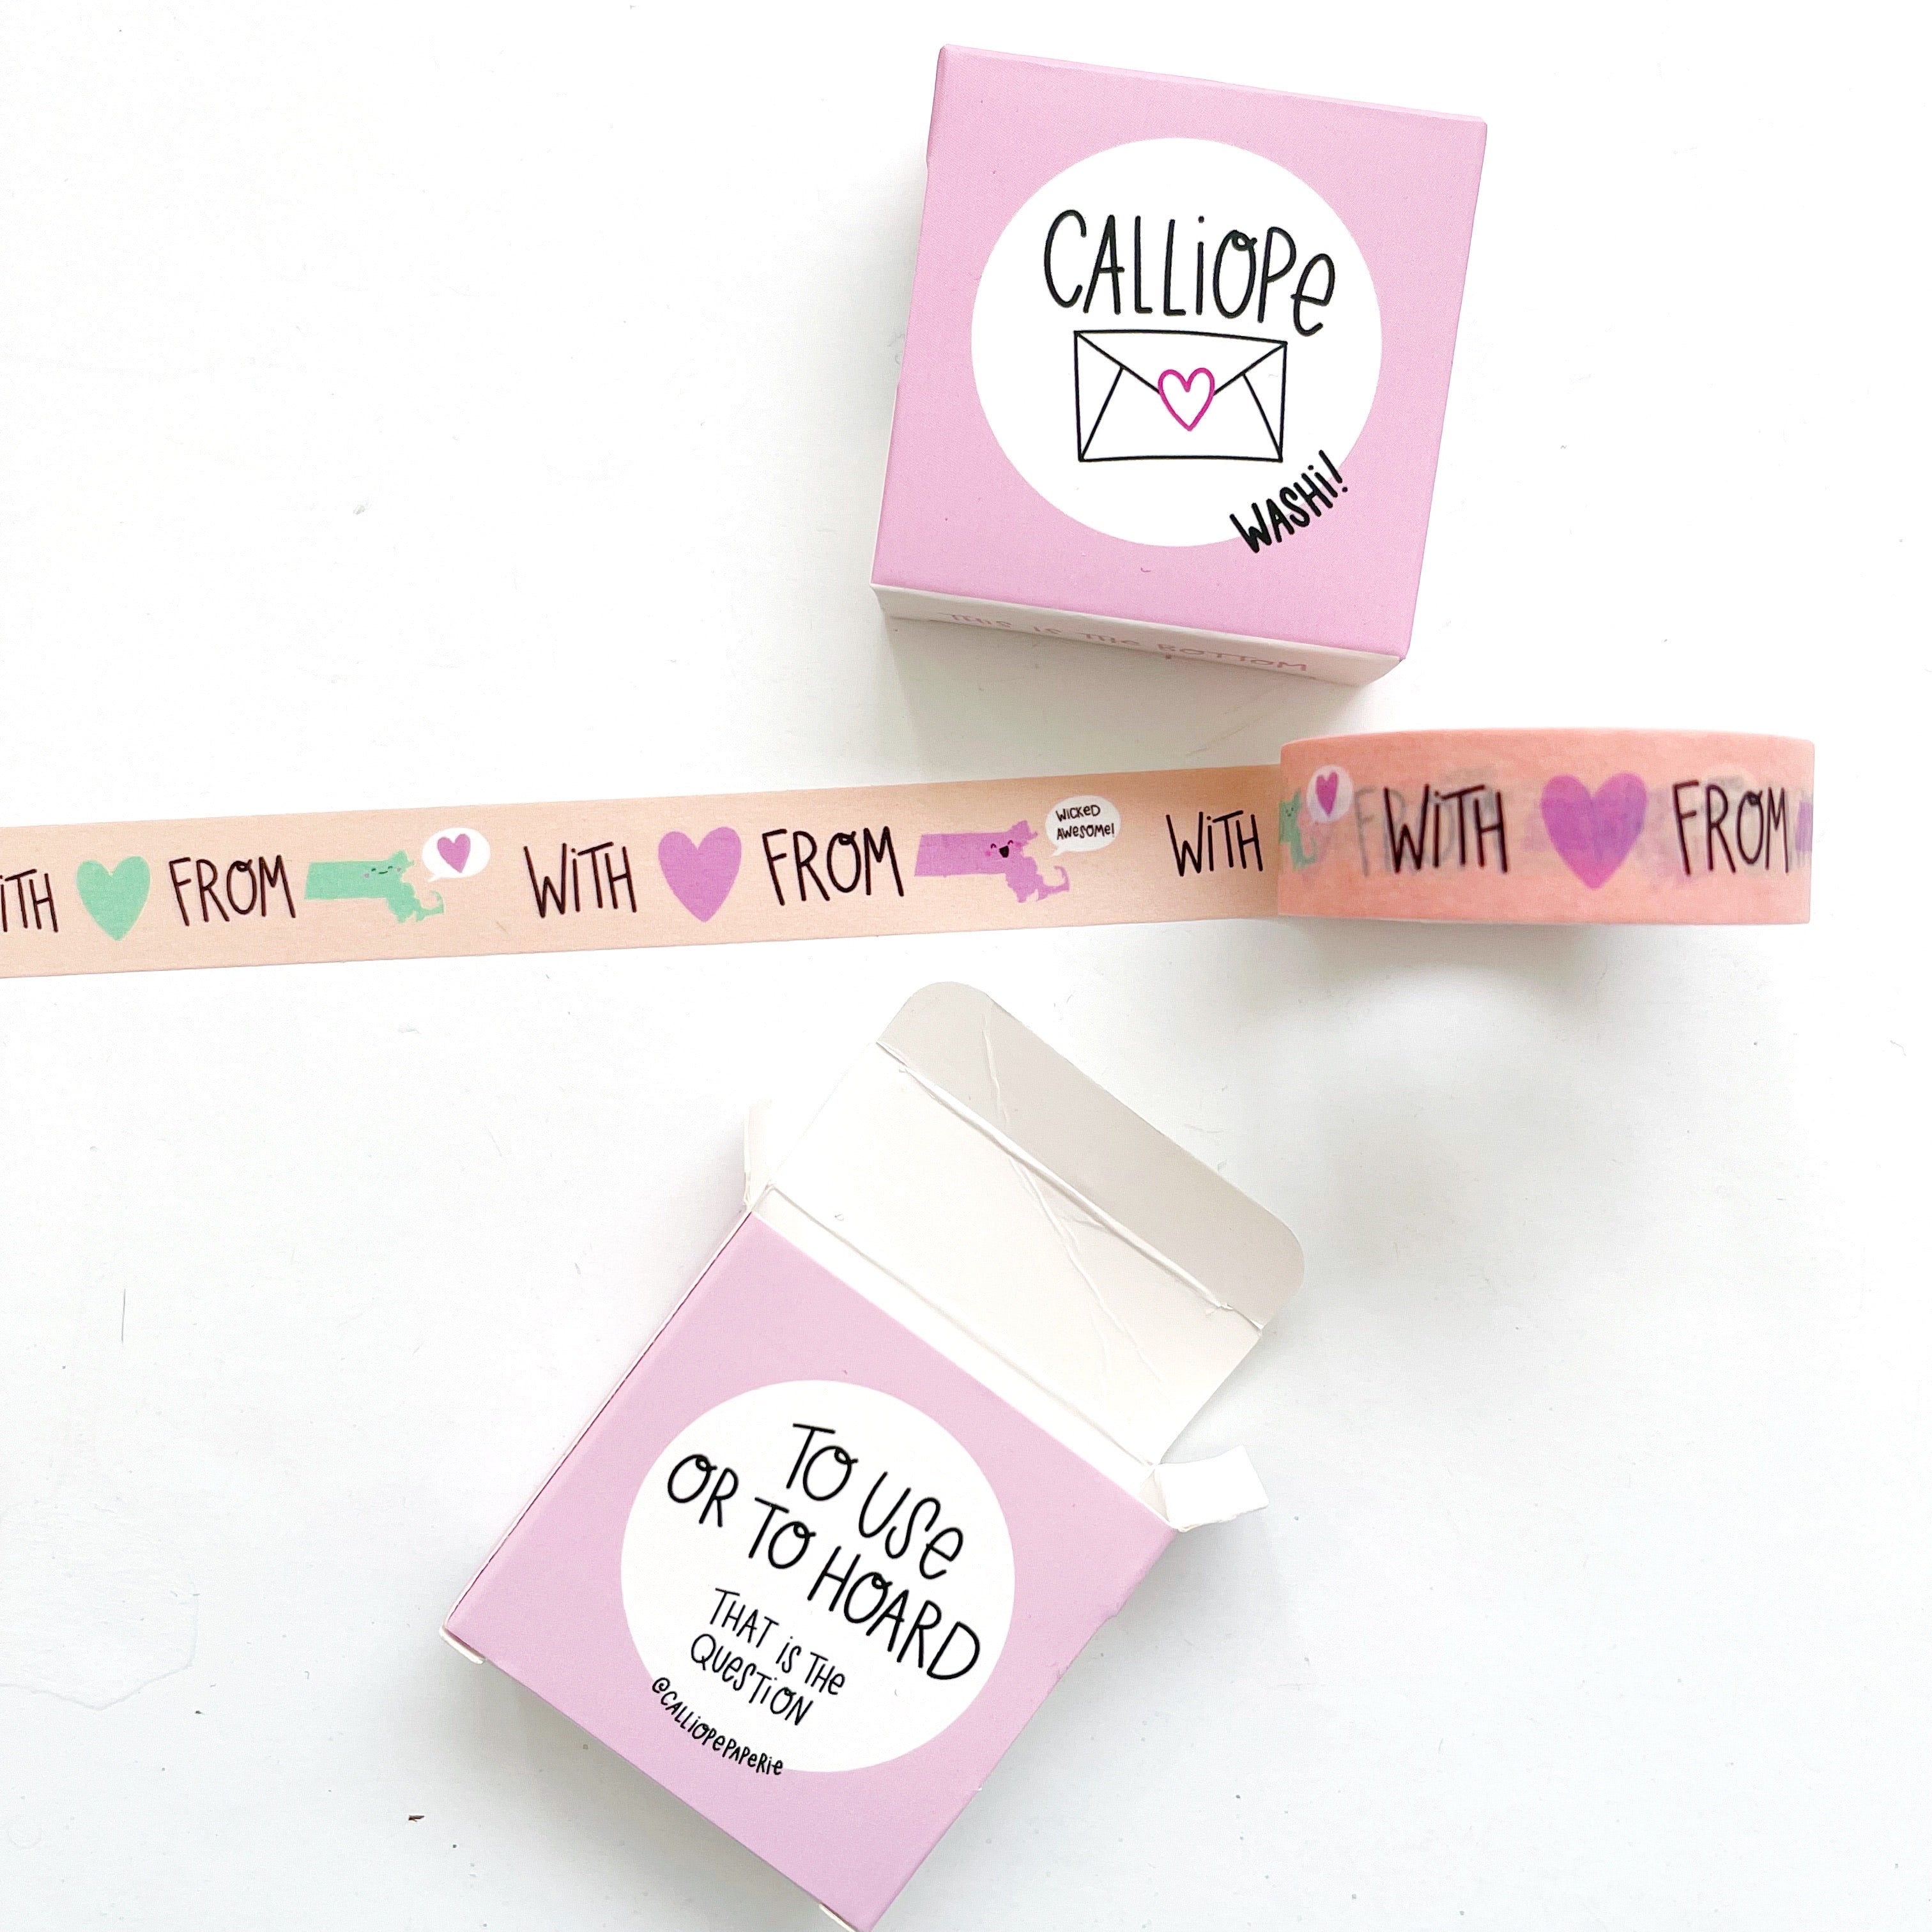 Image of washi tape with peach background with image of mint green state of Massachusetts and black text says, "With" image of pink heart and "from" with pink image of state of Massachusetts with word bubble with black text says, "Wicked awesome". 